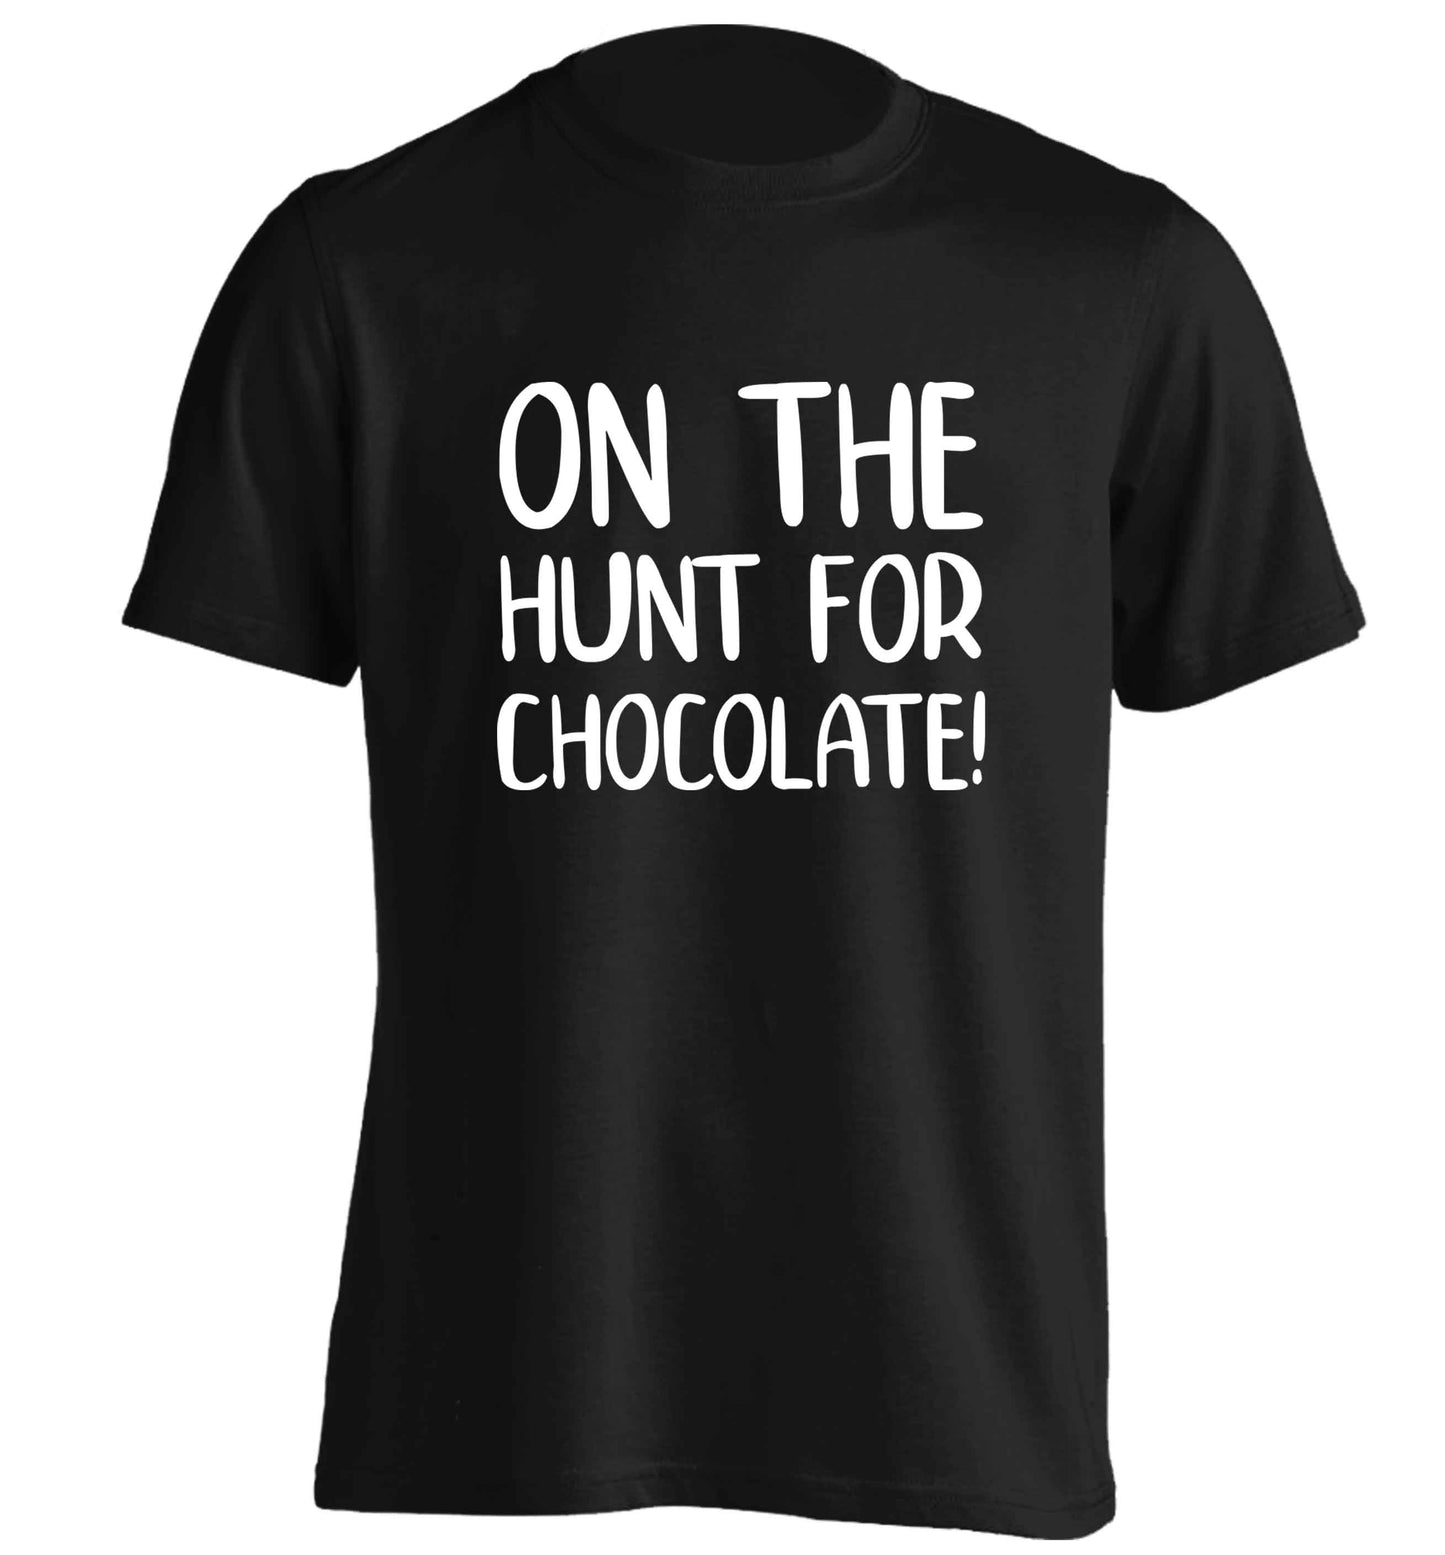 On the hunt for chocolate! adults unisex black Tshirt 2XL